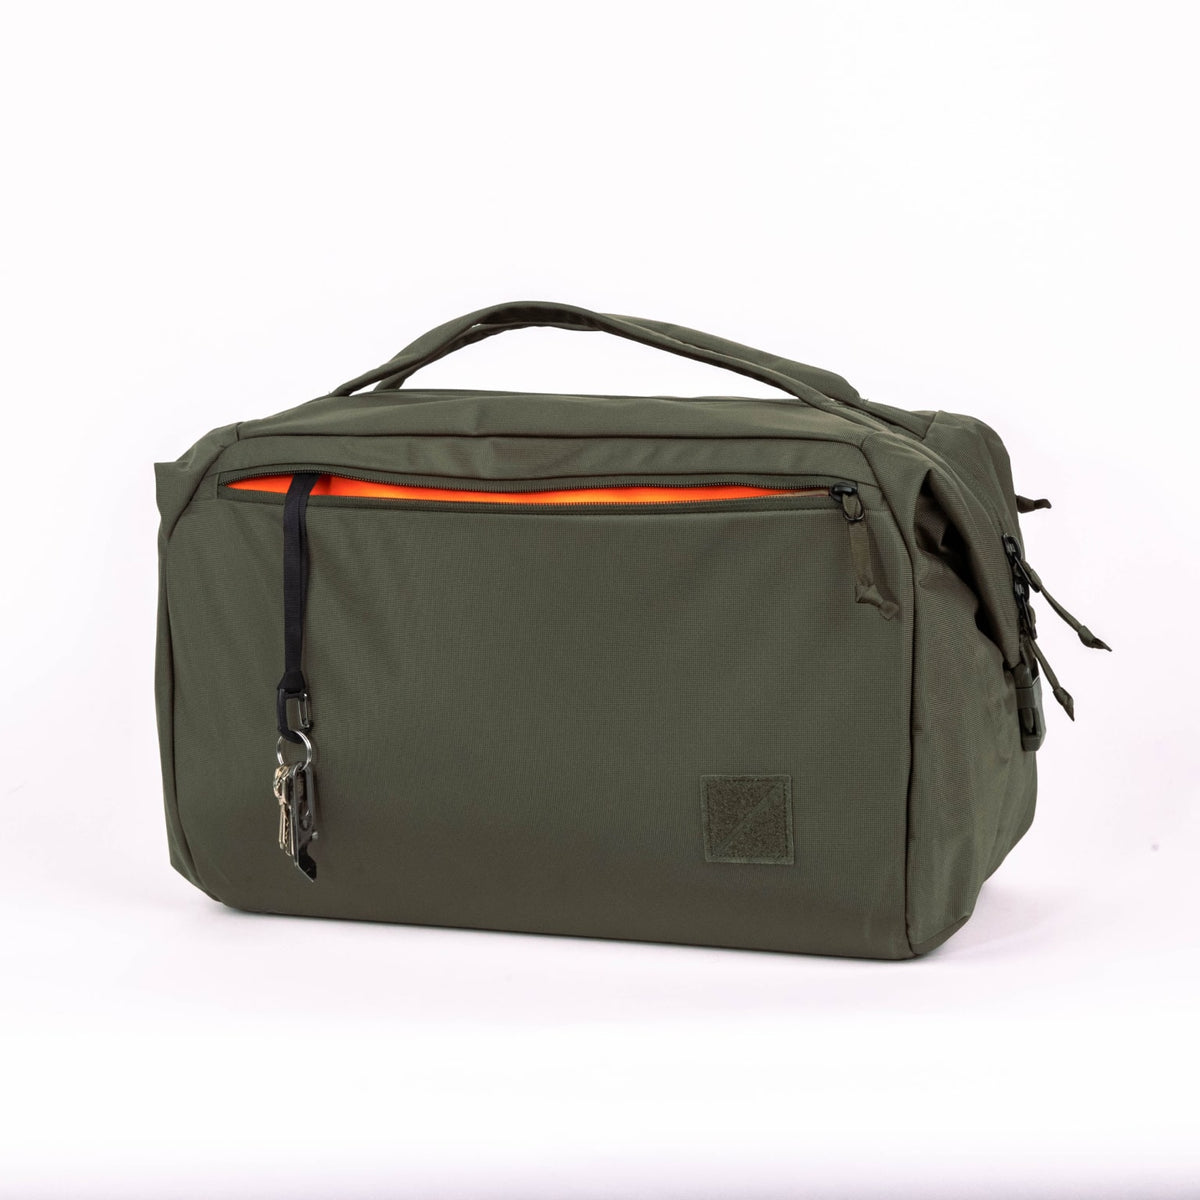 The NORTH FACE Base Camp Duffel Bag / Backpack Olive Green